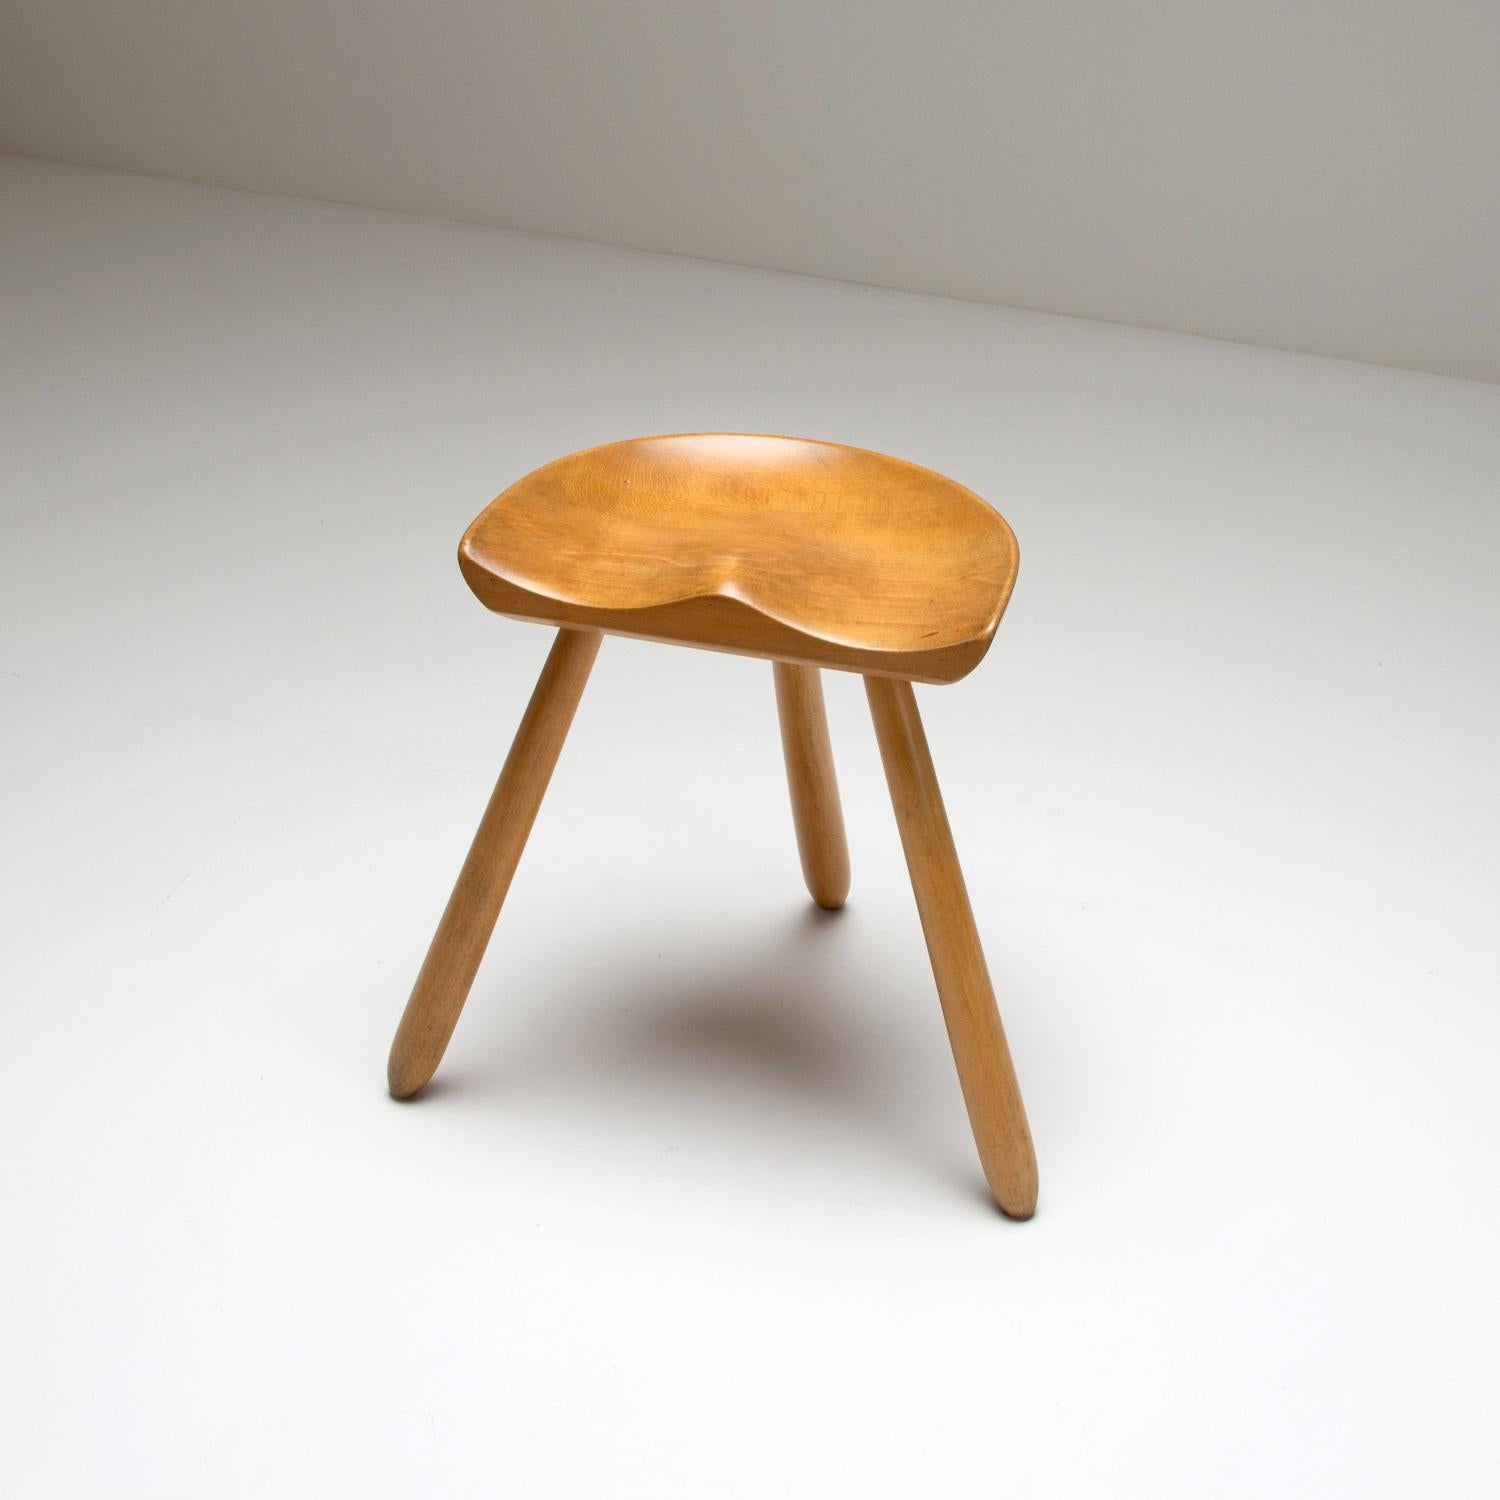 Hand-Crafted Tripod Milking Stool, Denmark, 1950s For Sale